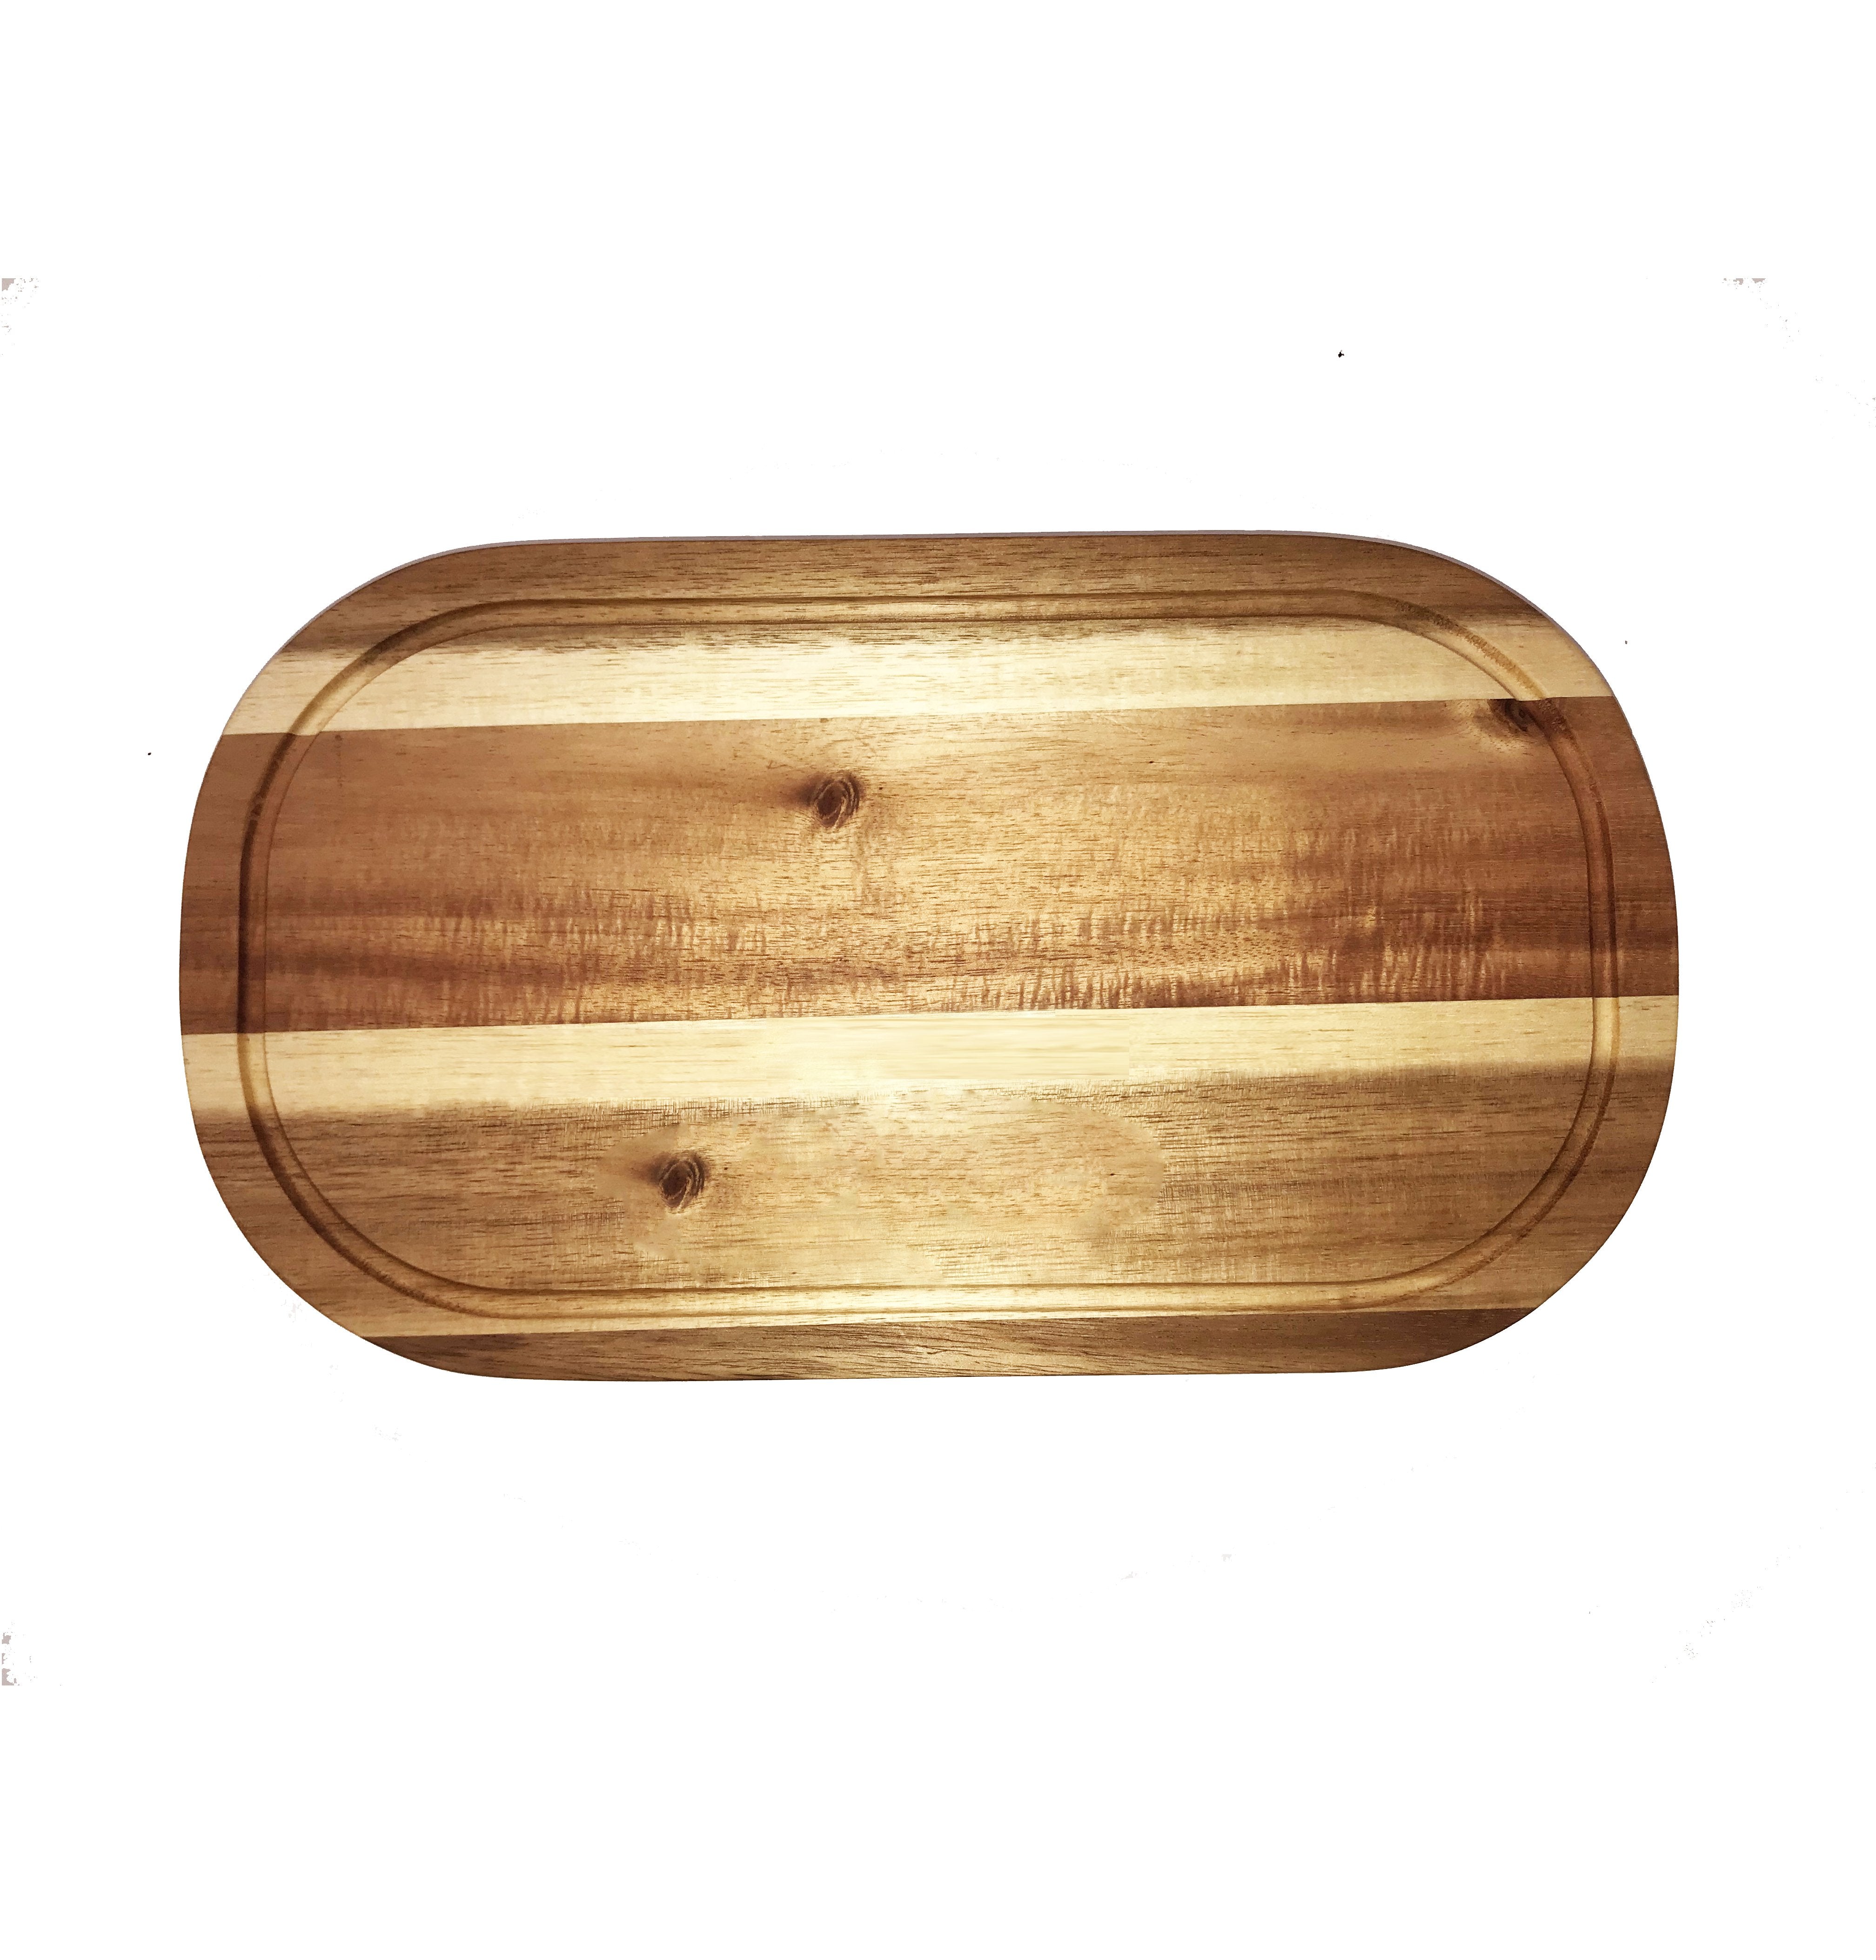 Set of 3 Acacia 12" Rounded Serving Boards